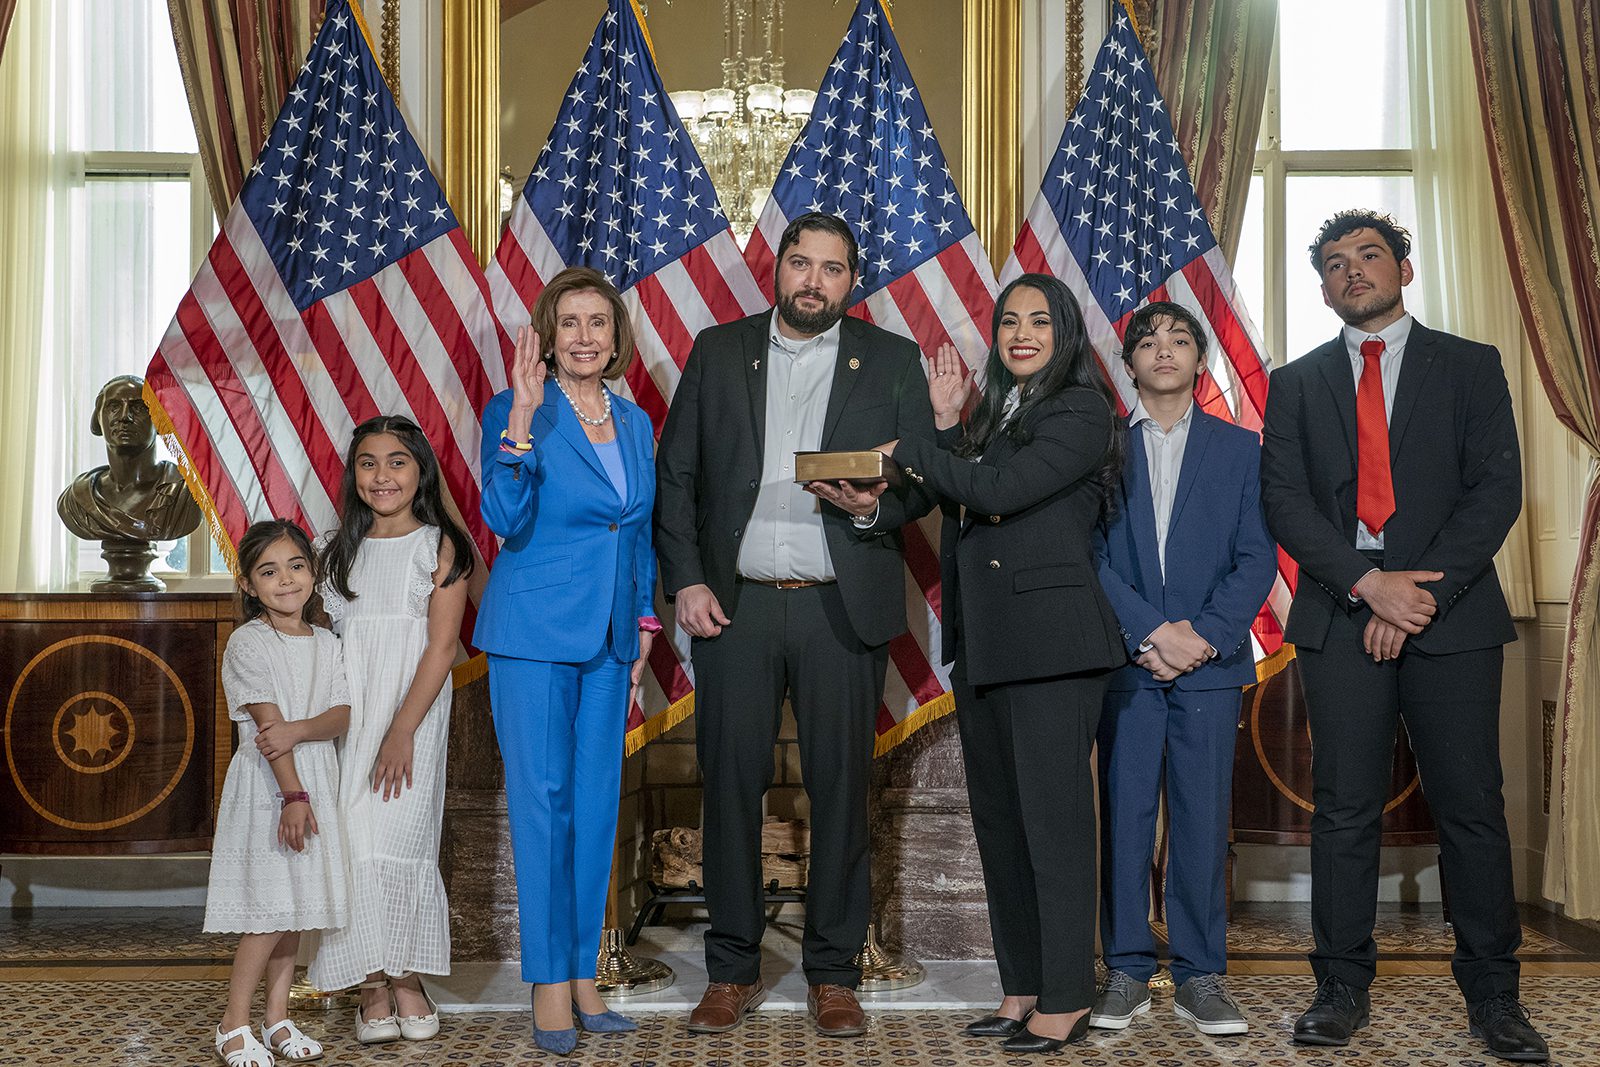 House Speaker Nancy Pelosi administers the House oath to Rep. Mayra Flores, R-Texas, right as her husband John holds the Bible, during a mock swearing in ceremony at the Capitol in Washington, Tuesday, June 21, 2022, with children, from left, Milani, 6, Maite, 8, Jaden, 12, and John Michael, 16. (AP Photo/Gemunu Amarasinghe)